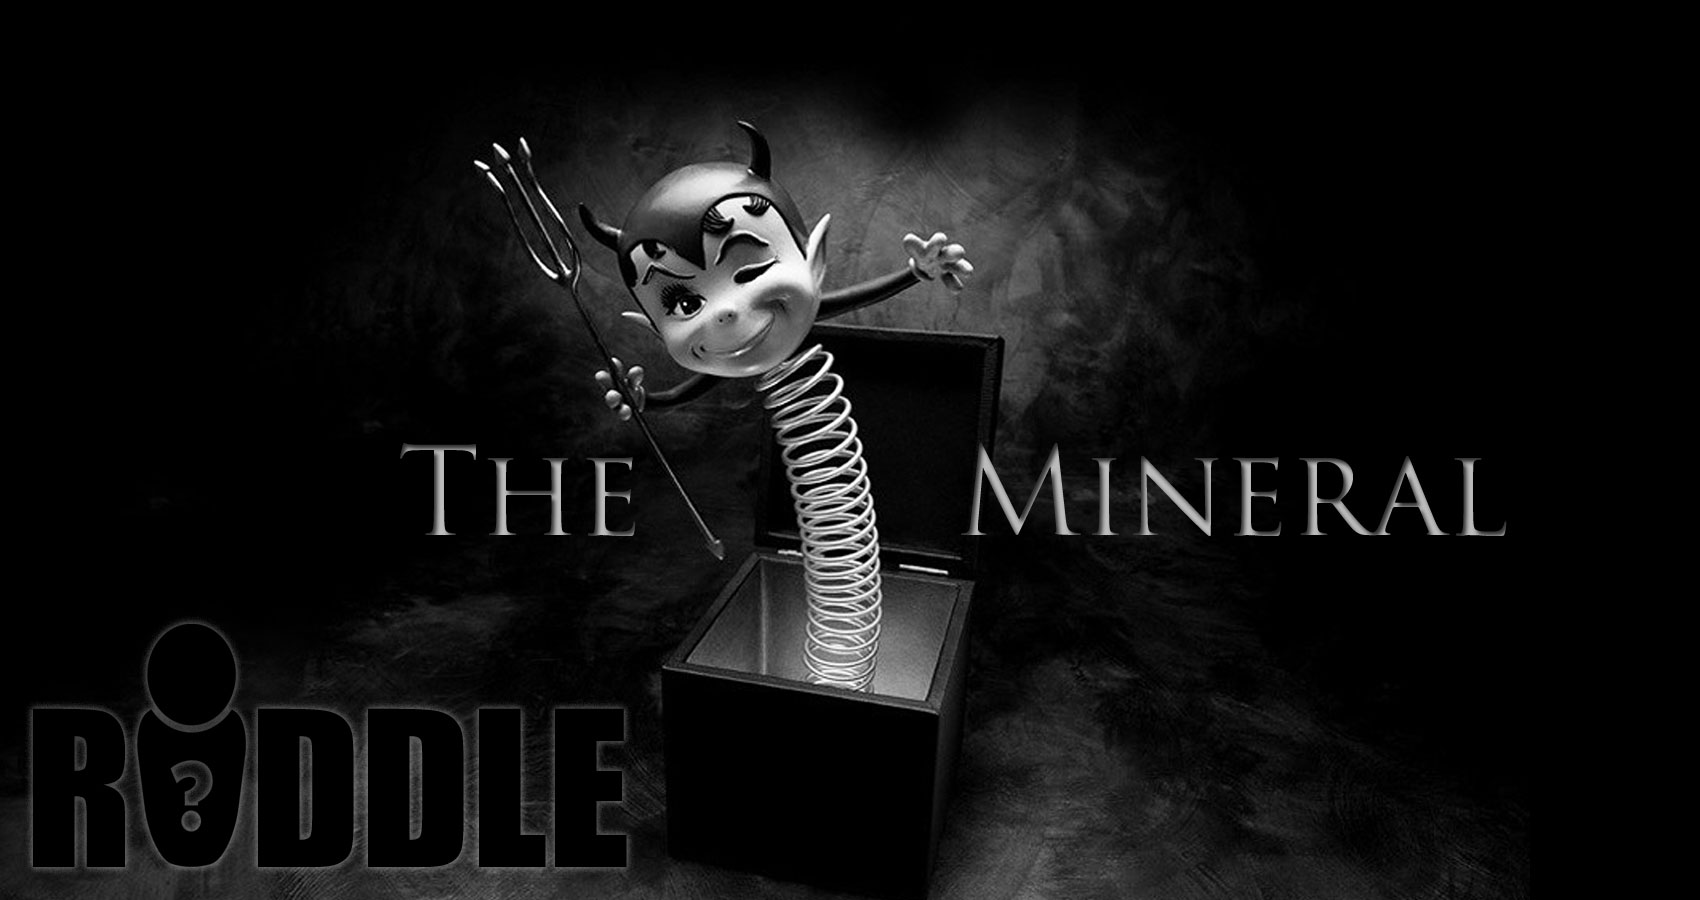 The Mineral riddle by Liam Ward (The Judge) at Spillwords.com